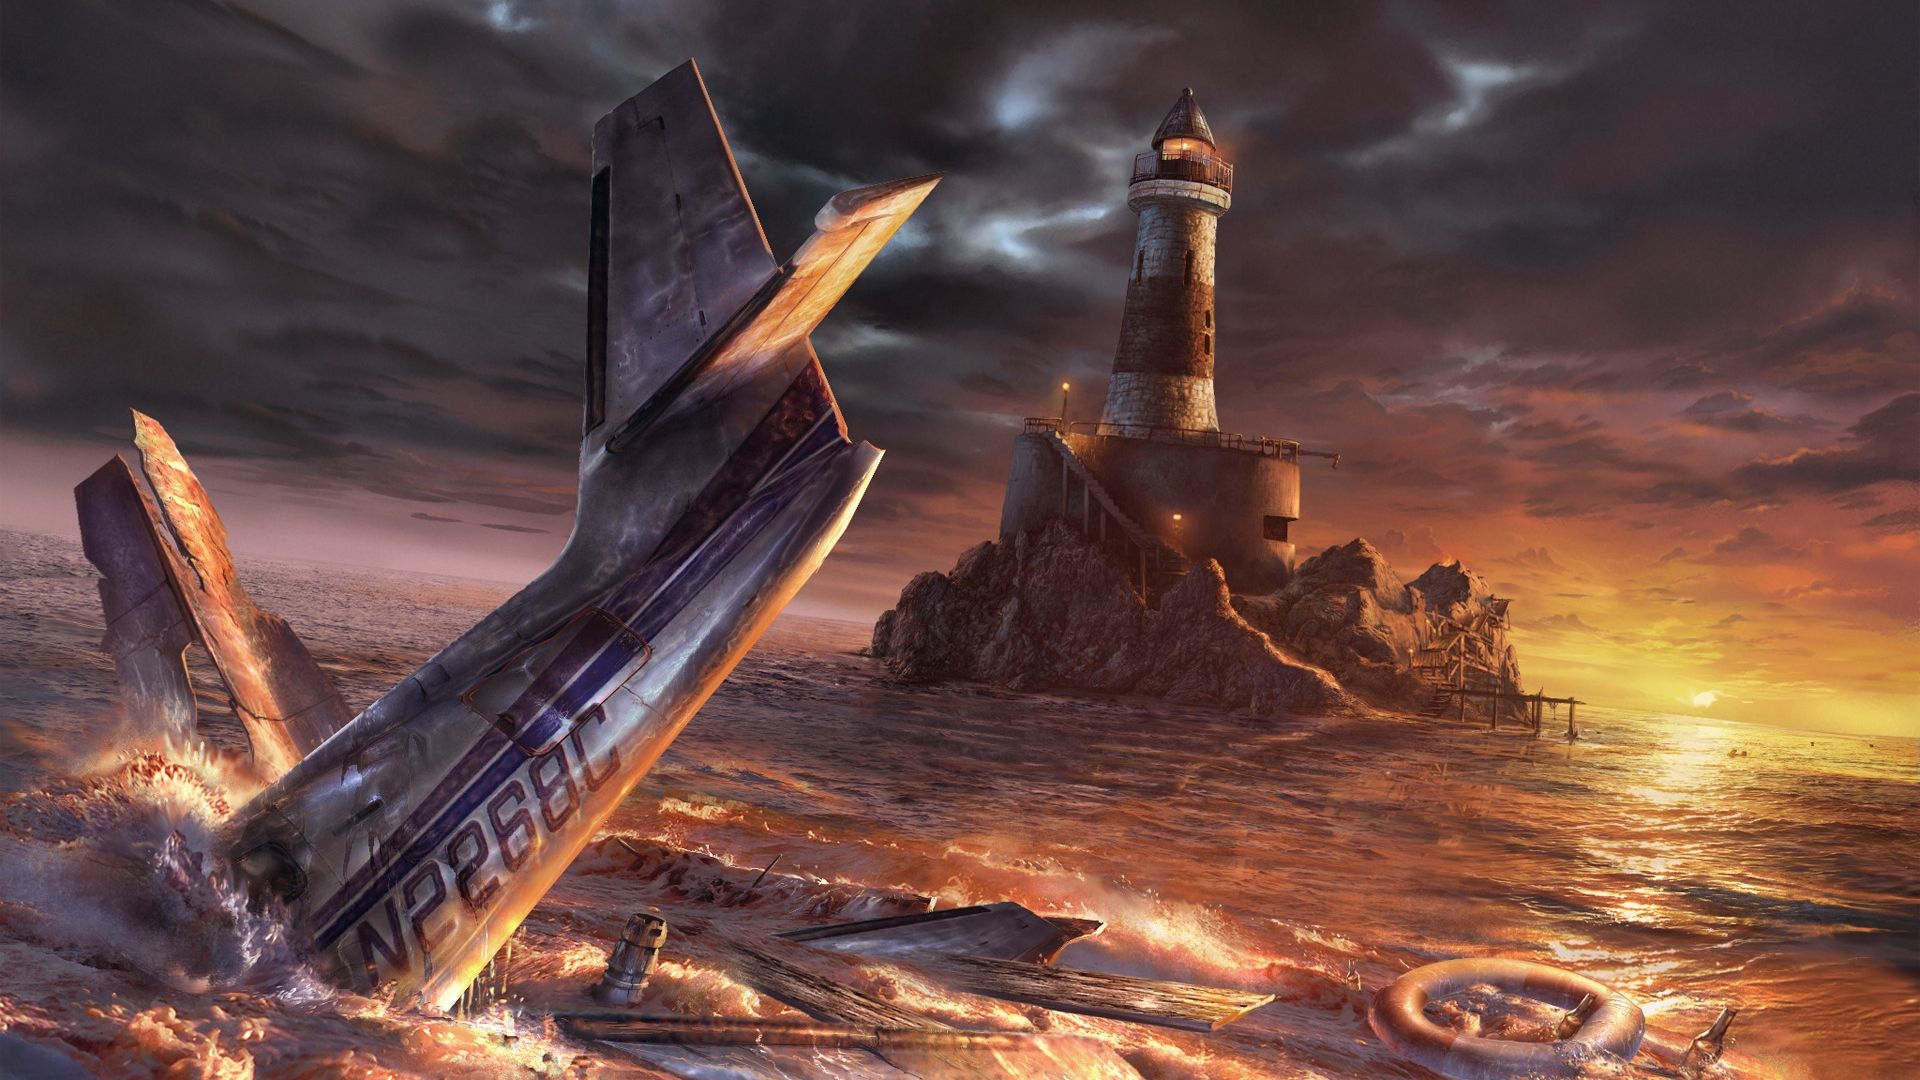 Free download Crashed airplane near the lighthouse wallpaper